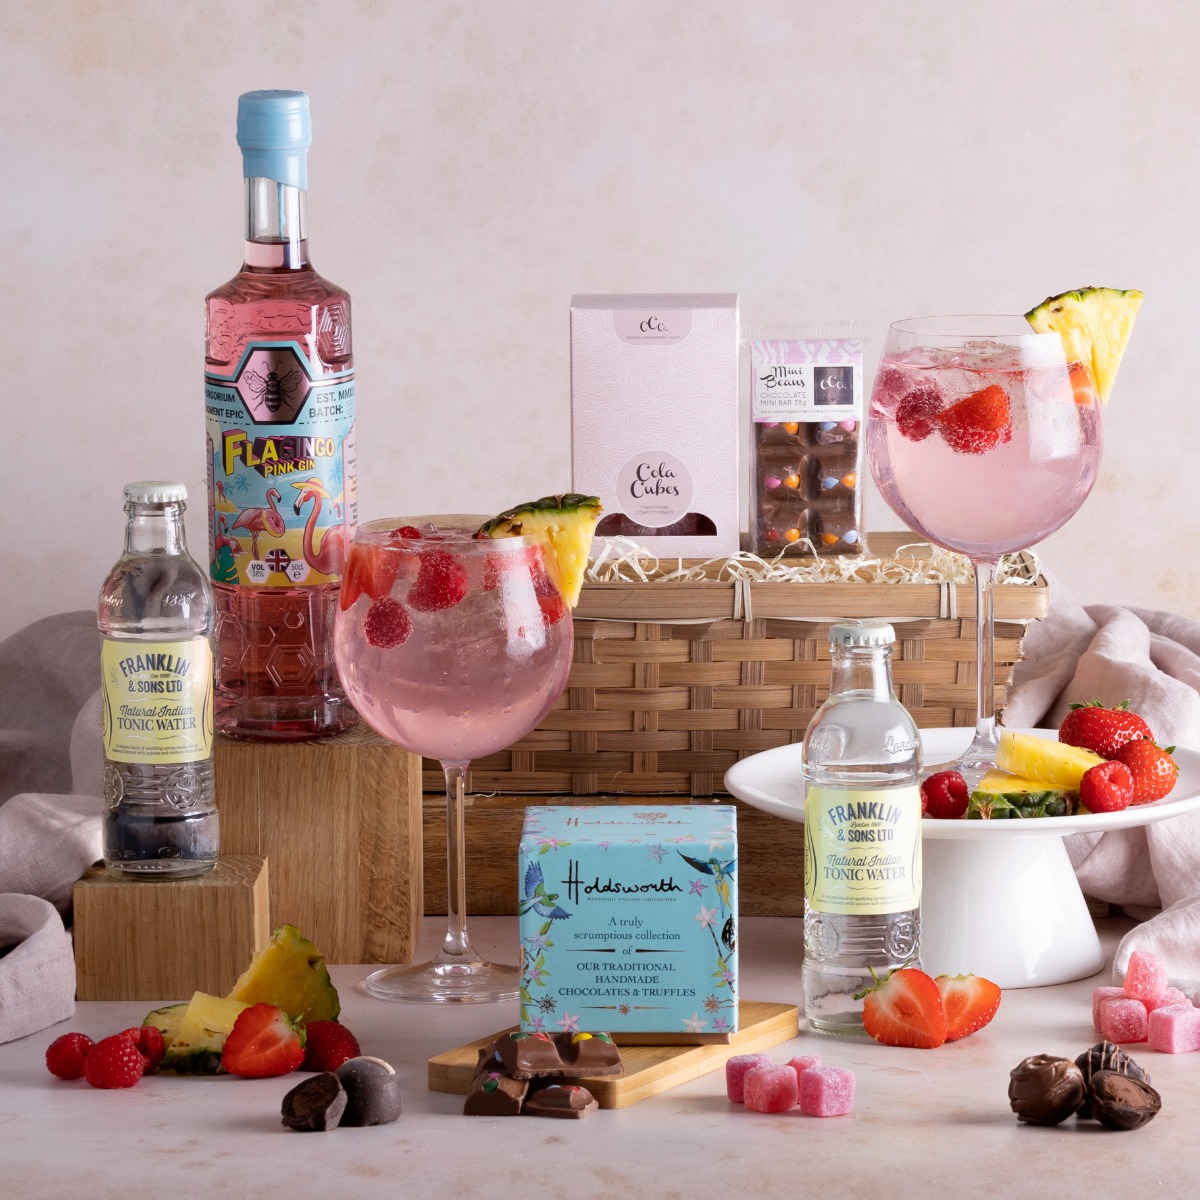 Flagingo Pink Gin Hamper for Valentine's Day - with contents on display